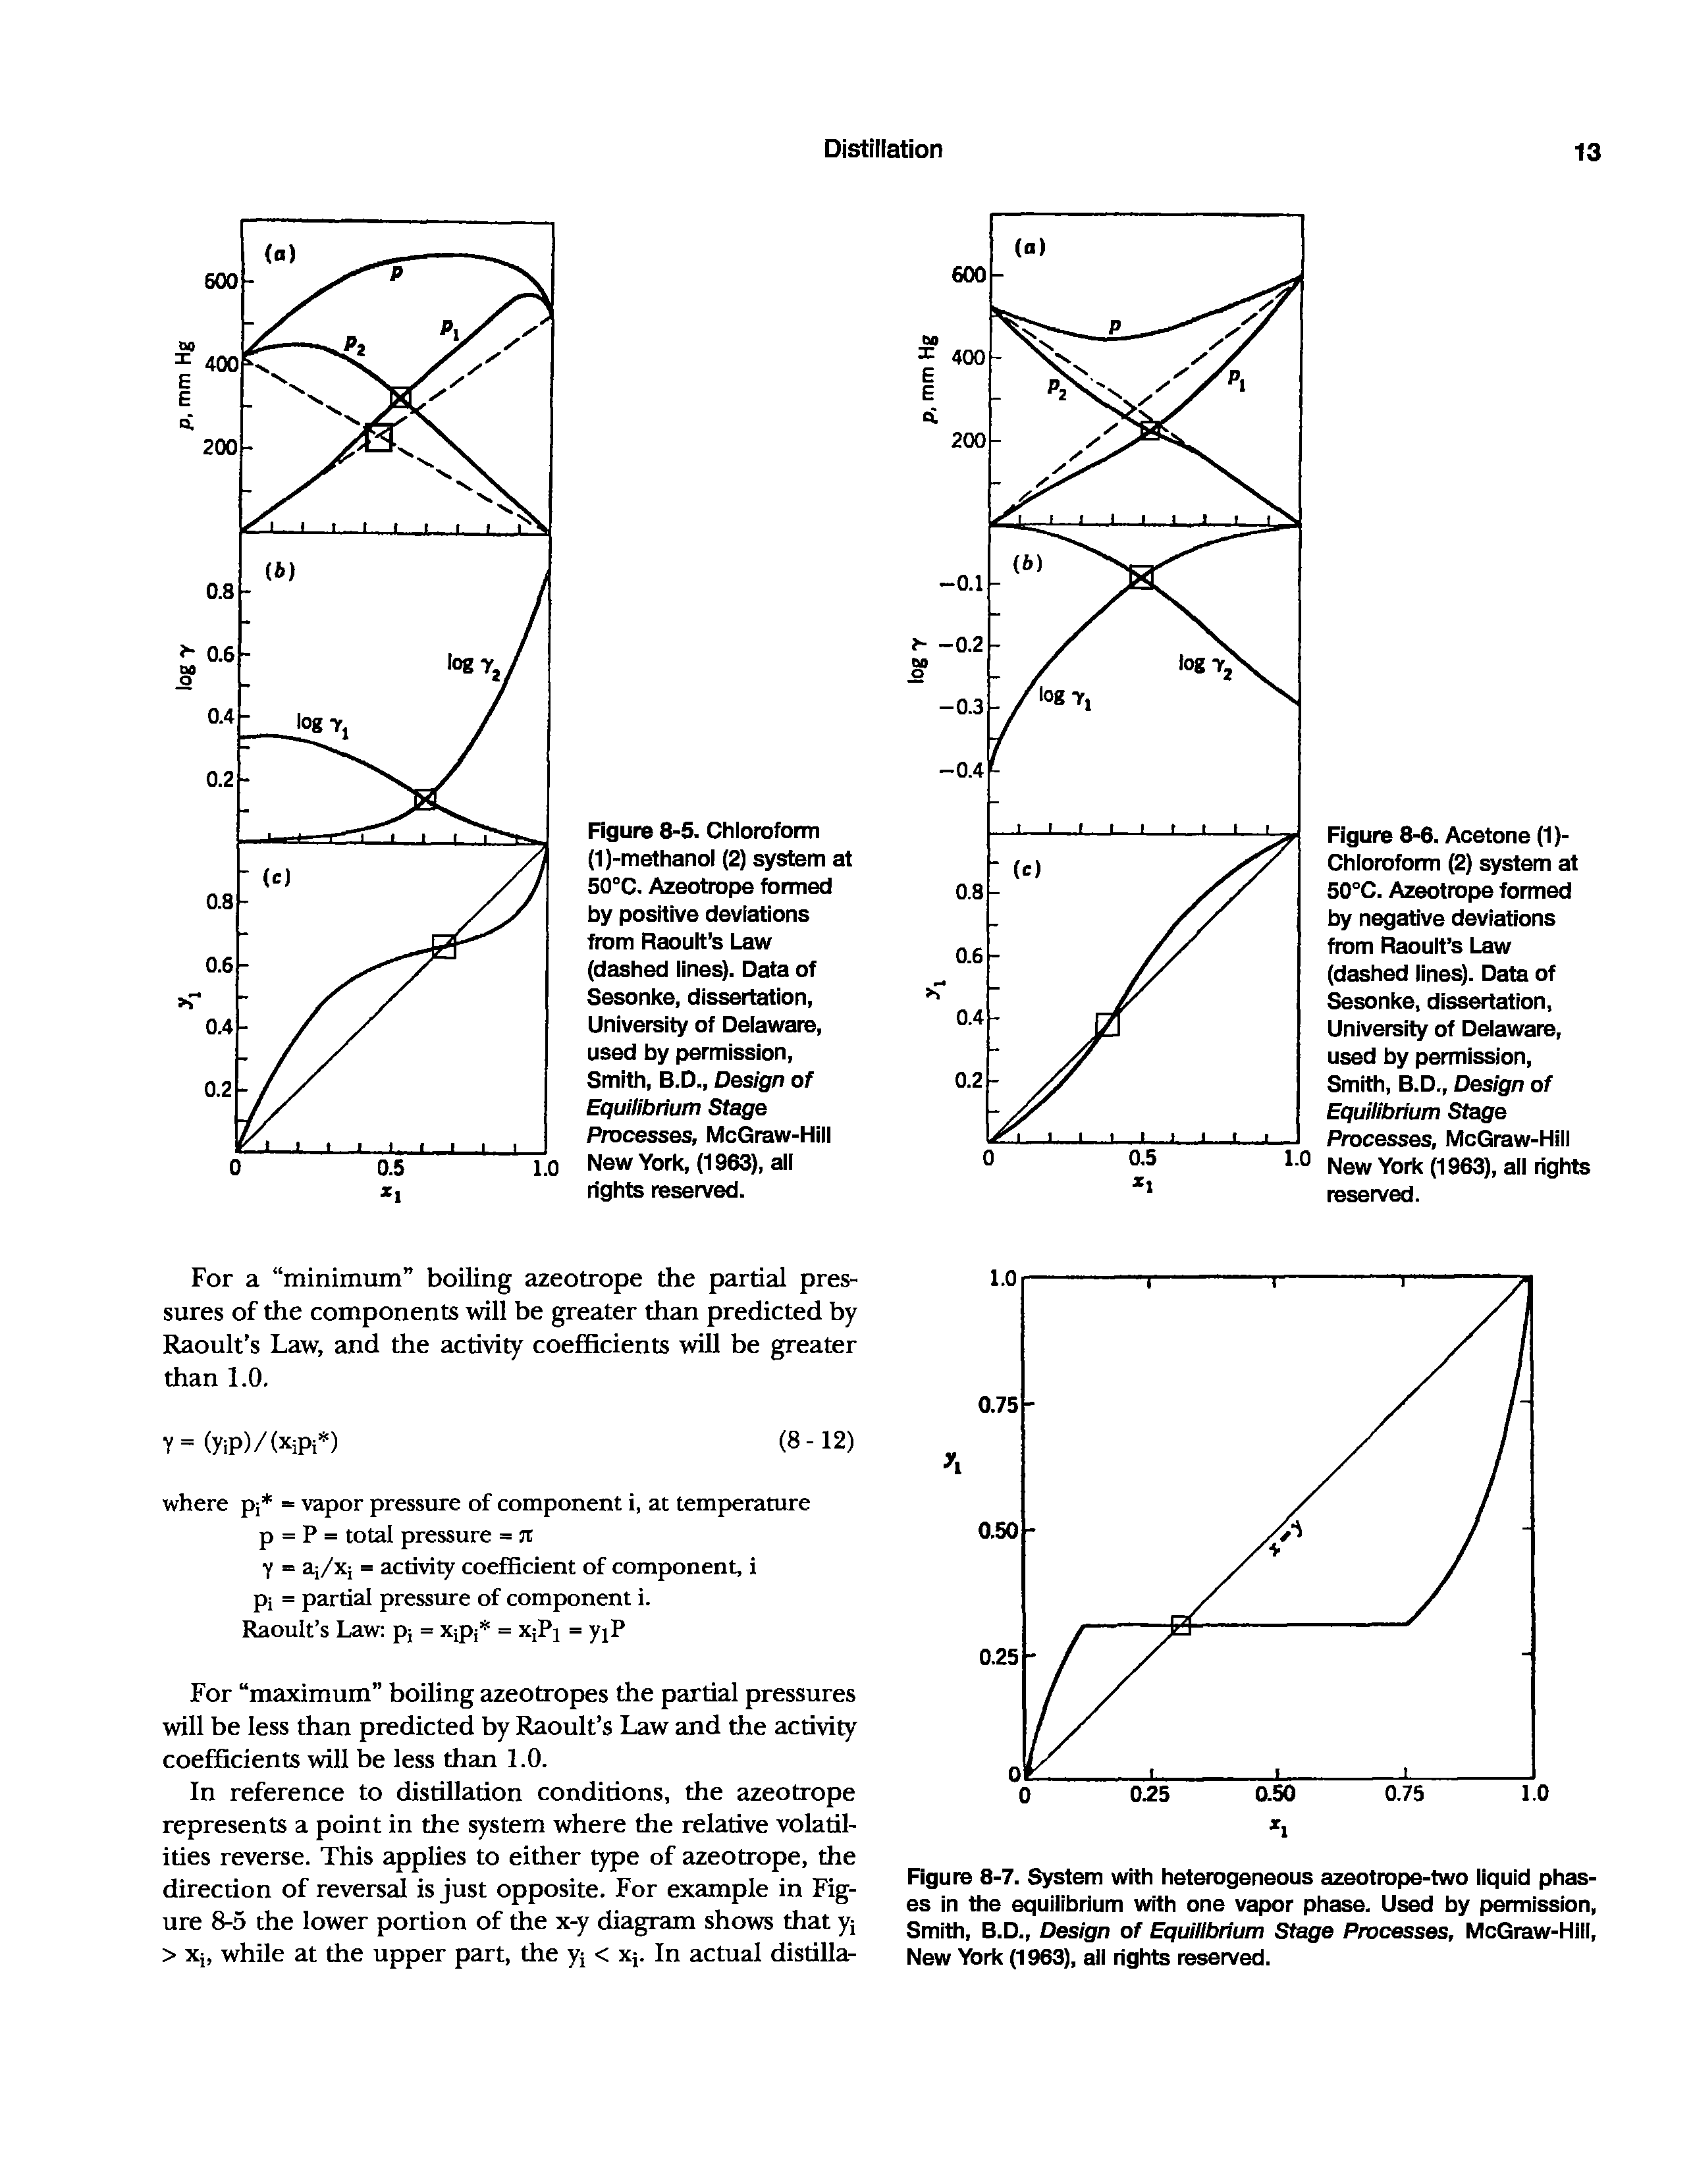 Figure 8-7. System with heterogeneous azeotrope-two liquid phases in the equilibrium with one vapor phase. Used by permission. Smith, B.D., Design of Equilibrium Stage Processes, McGraw-Hiii, New York (1963), all rights reserved.